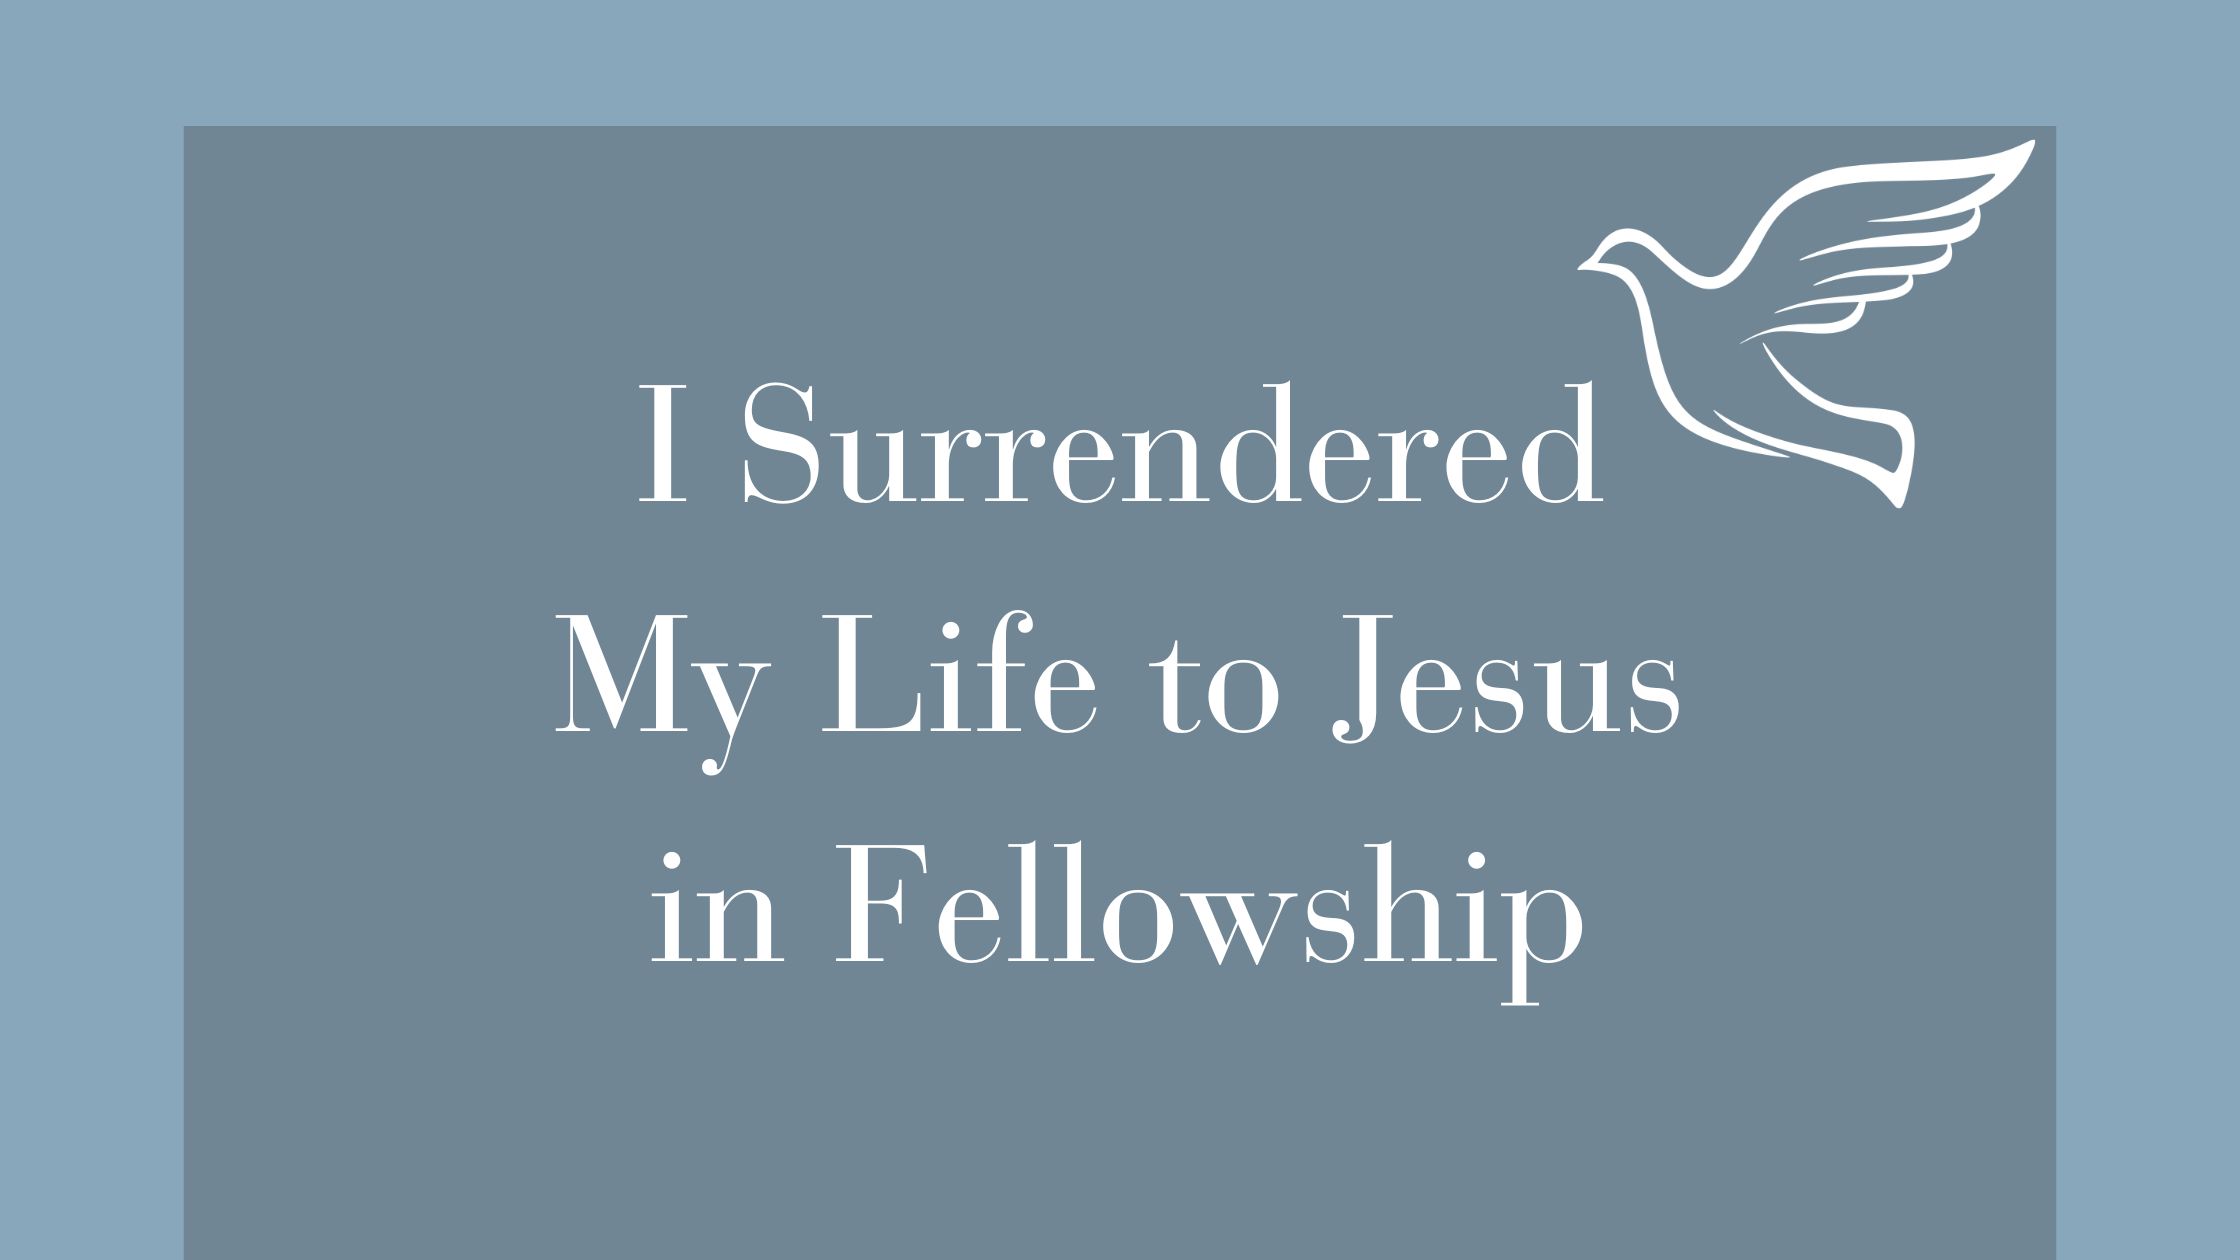 I Surrendered my life to Jesus in Fellowship (1)